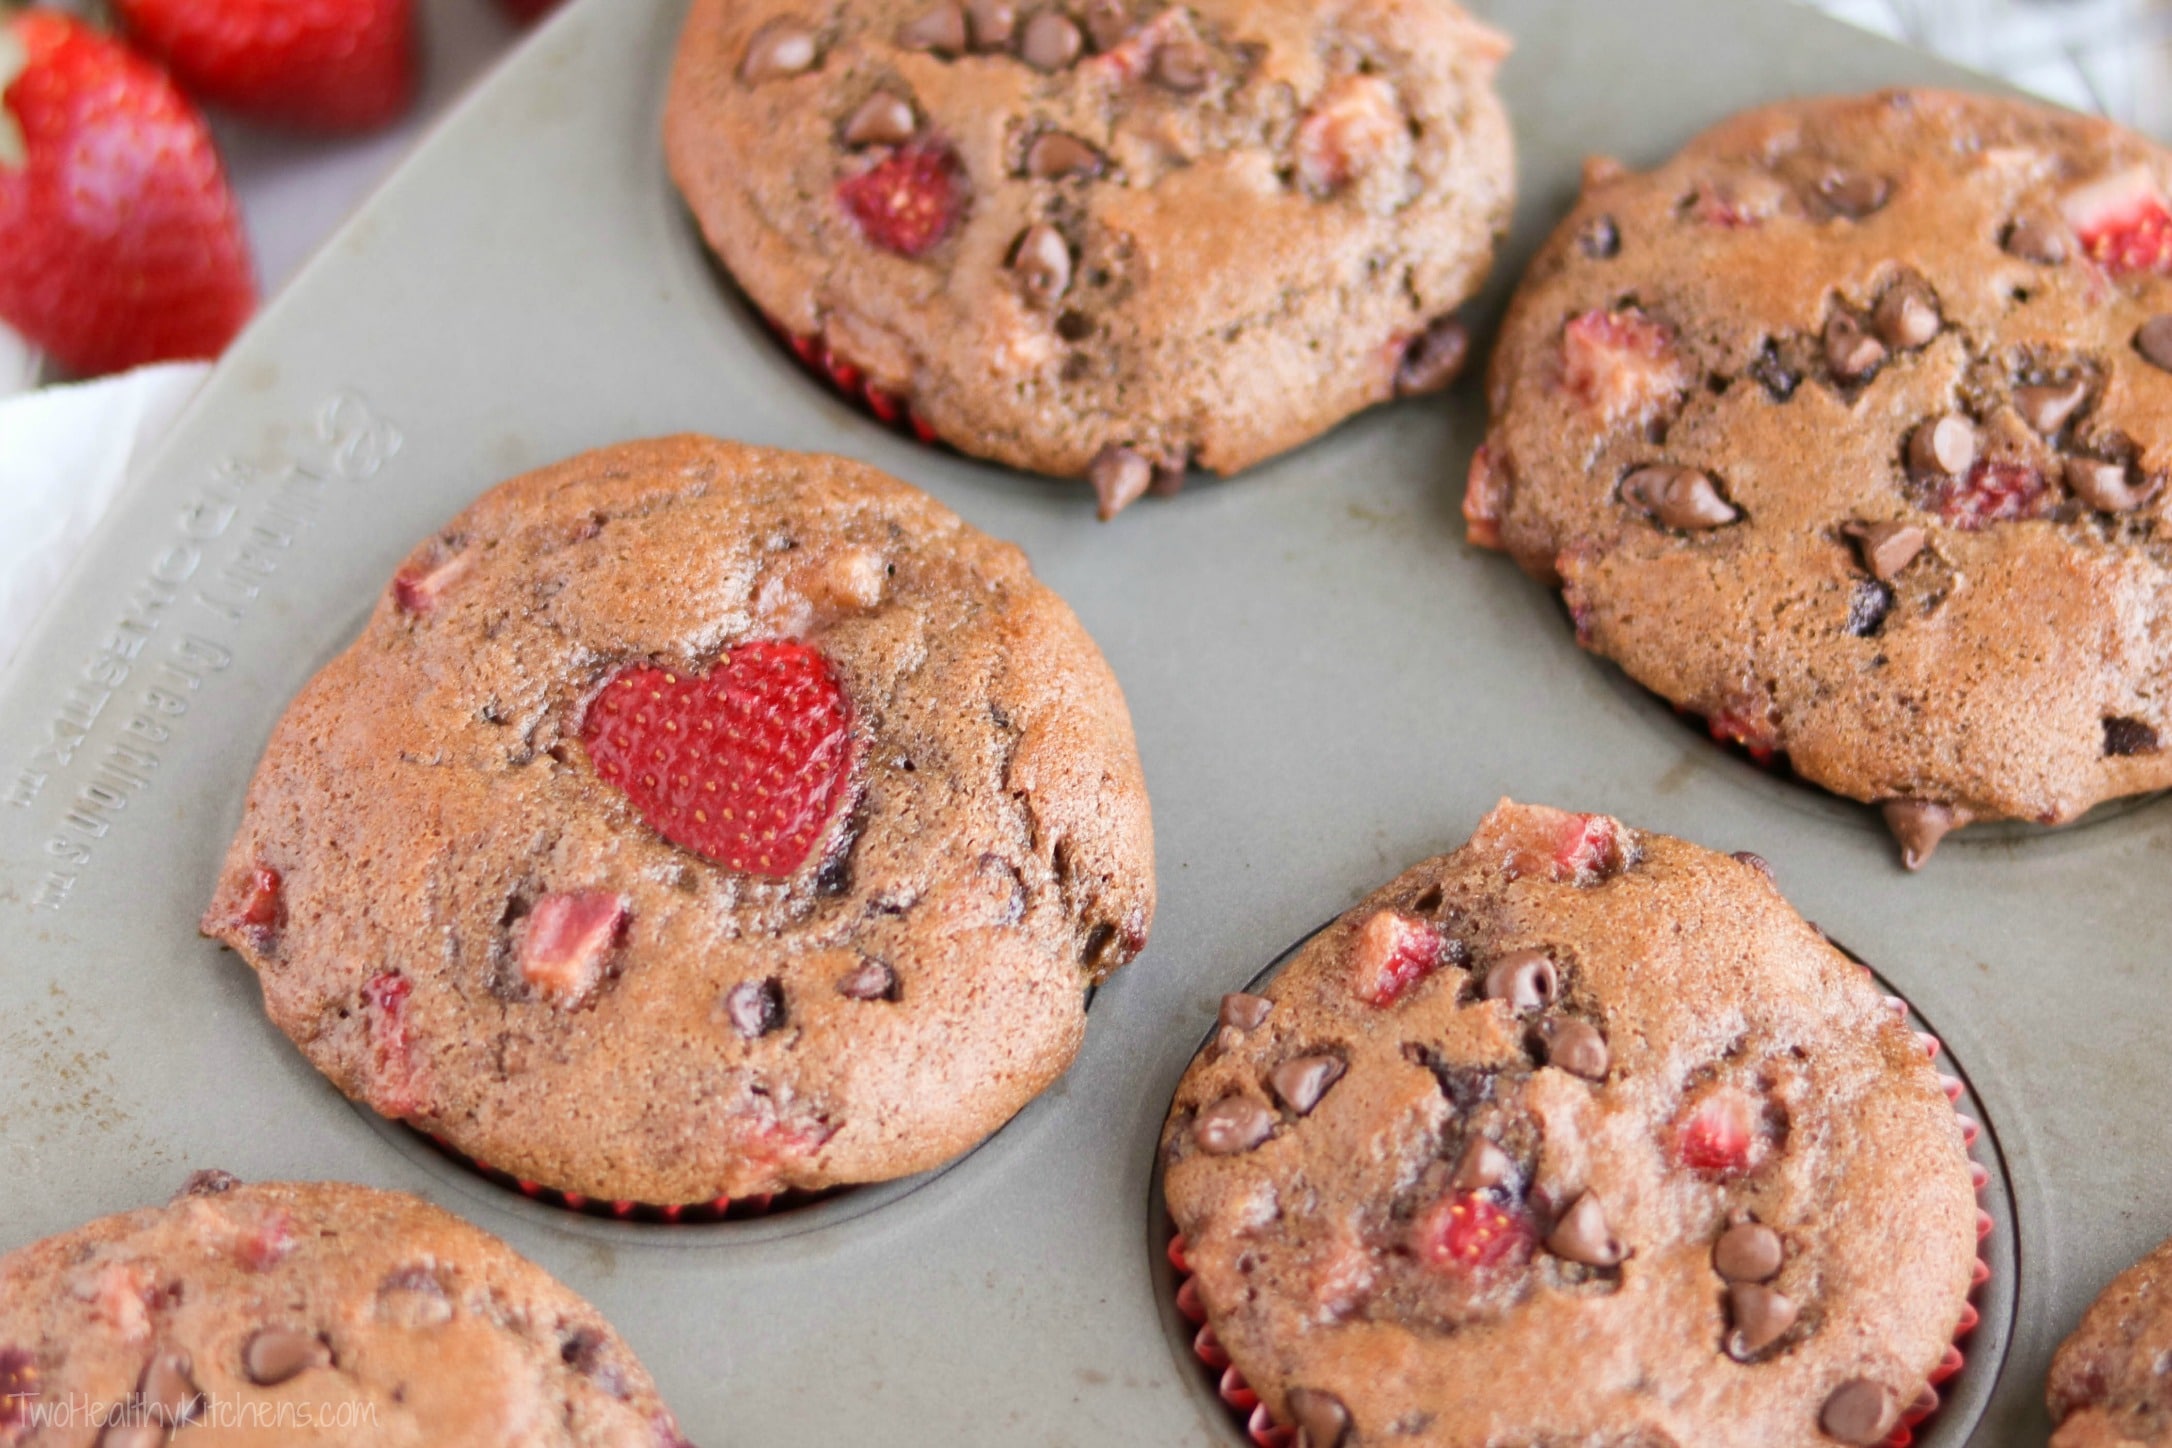 Closeup of baked muffins still in tin, focused on one with a heart-shaped strawberry amidst the chocolate chip topping.